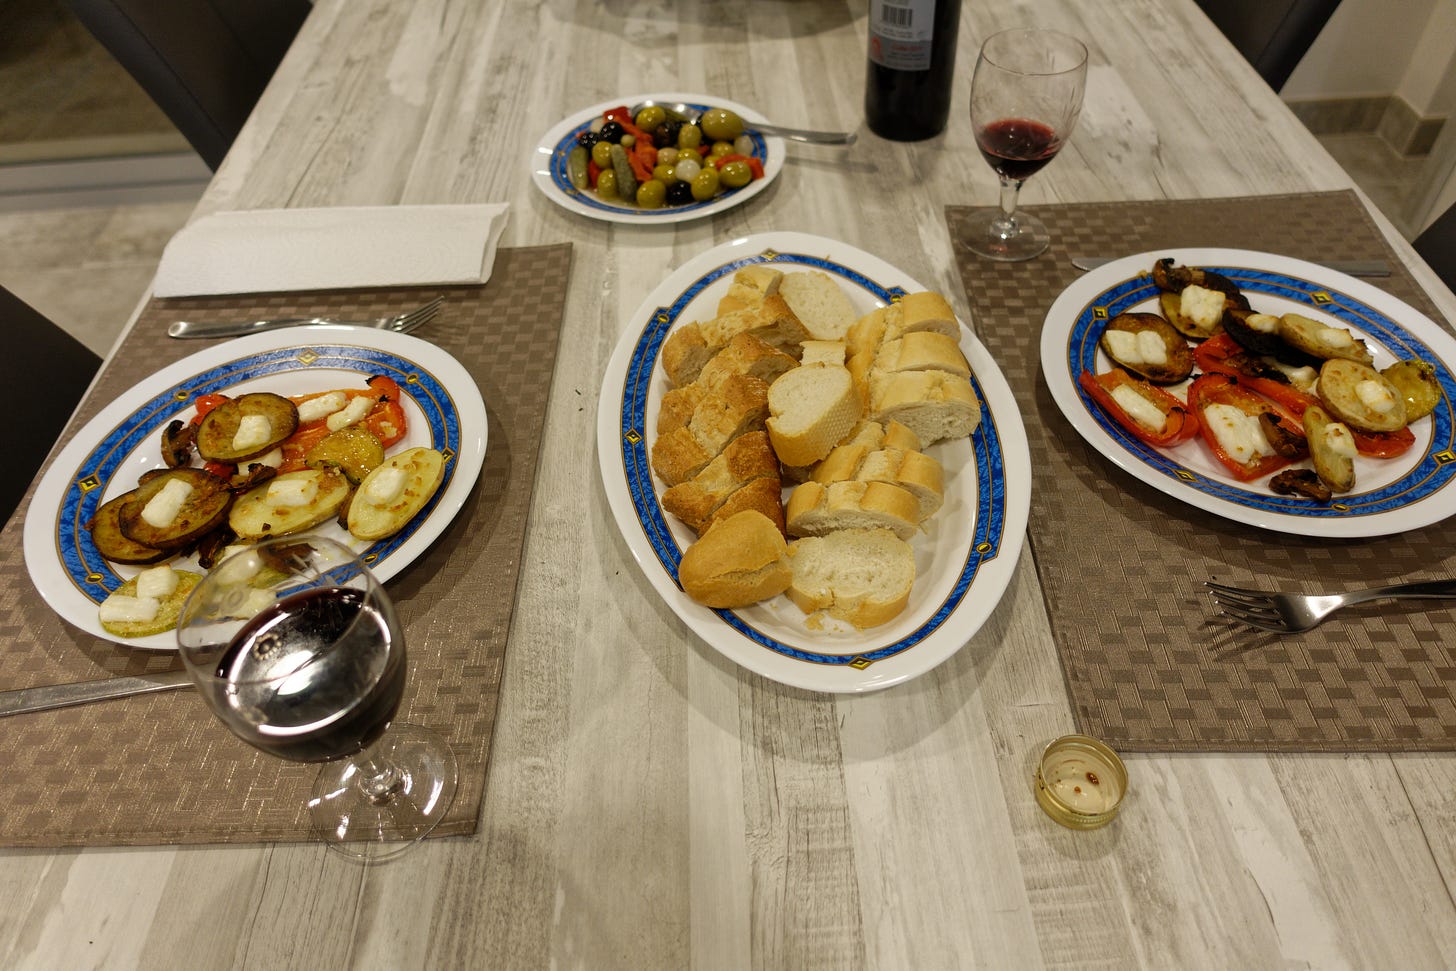 Gerhard’s special roasted vegetables with goat’s cheese and tons of garlic